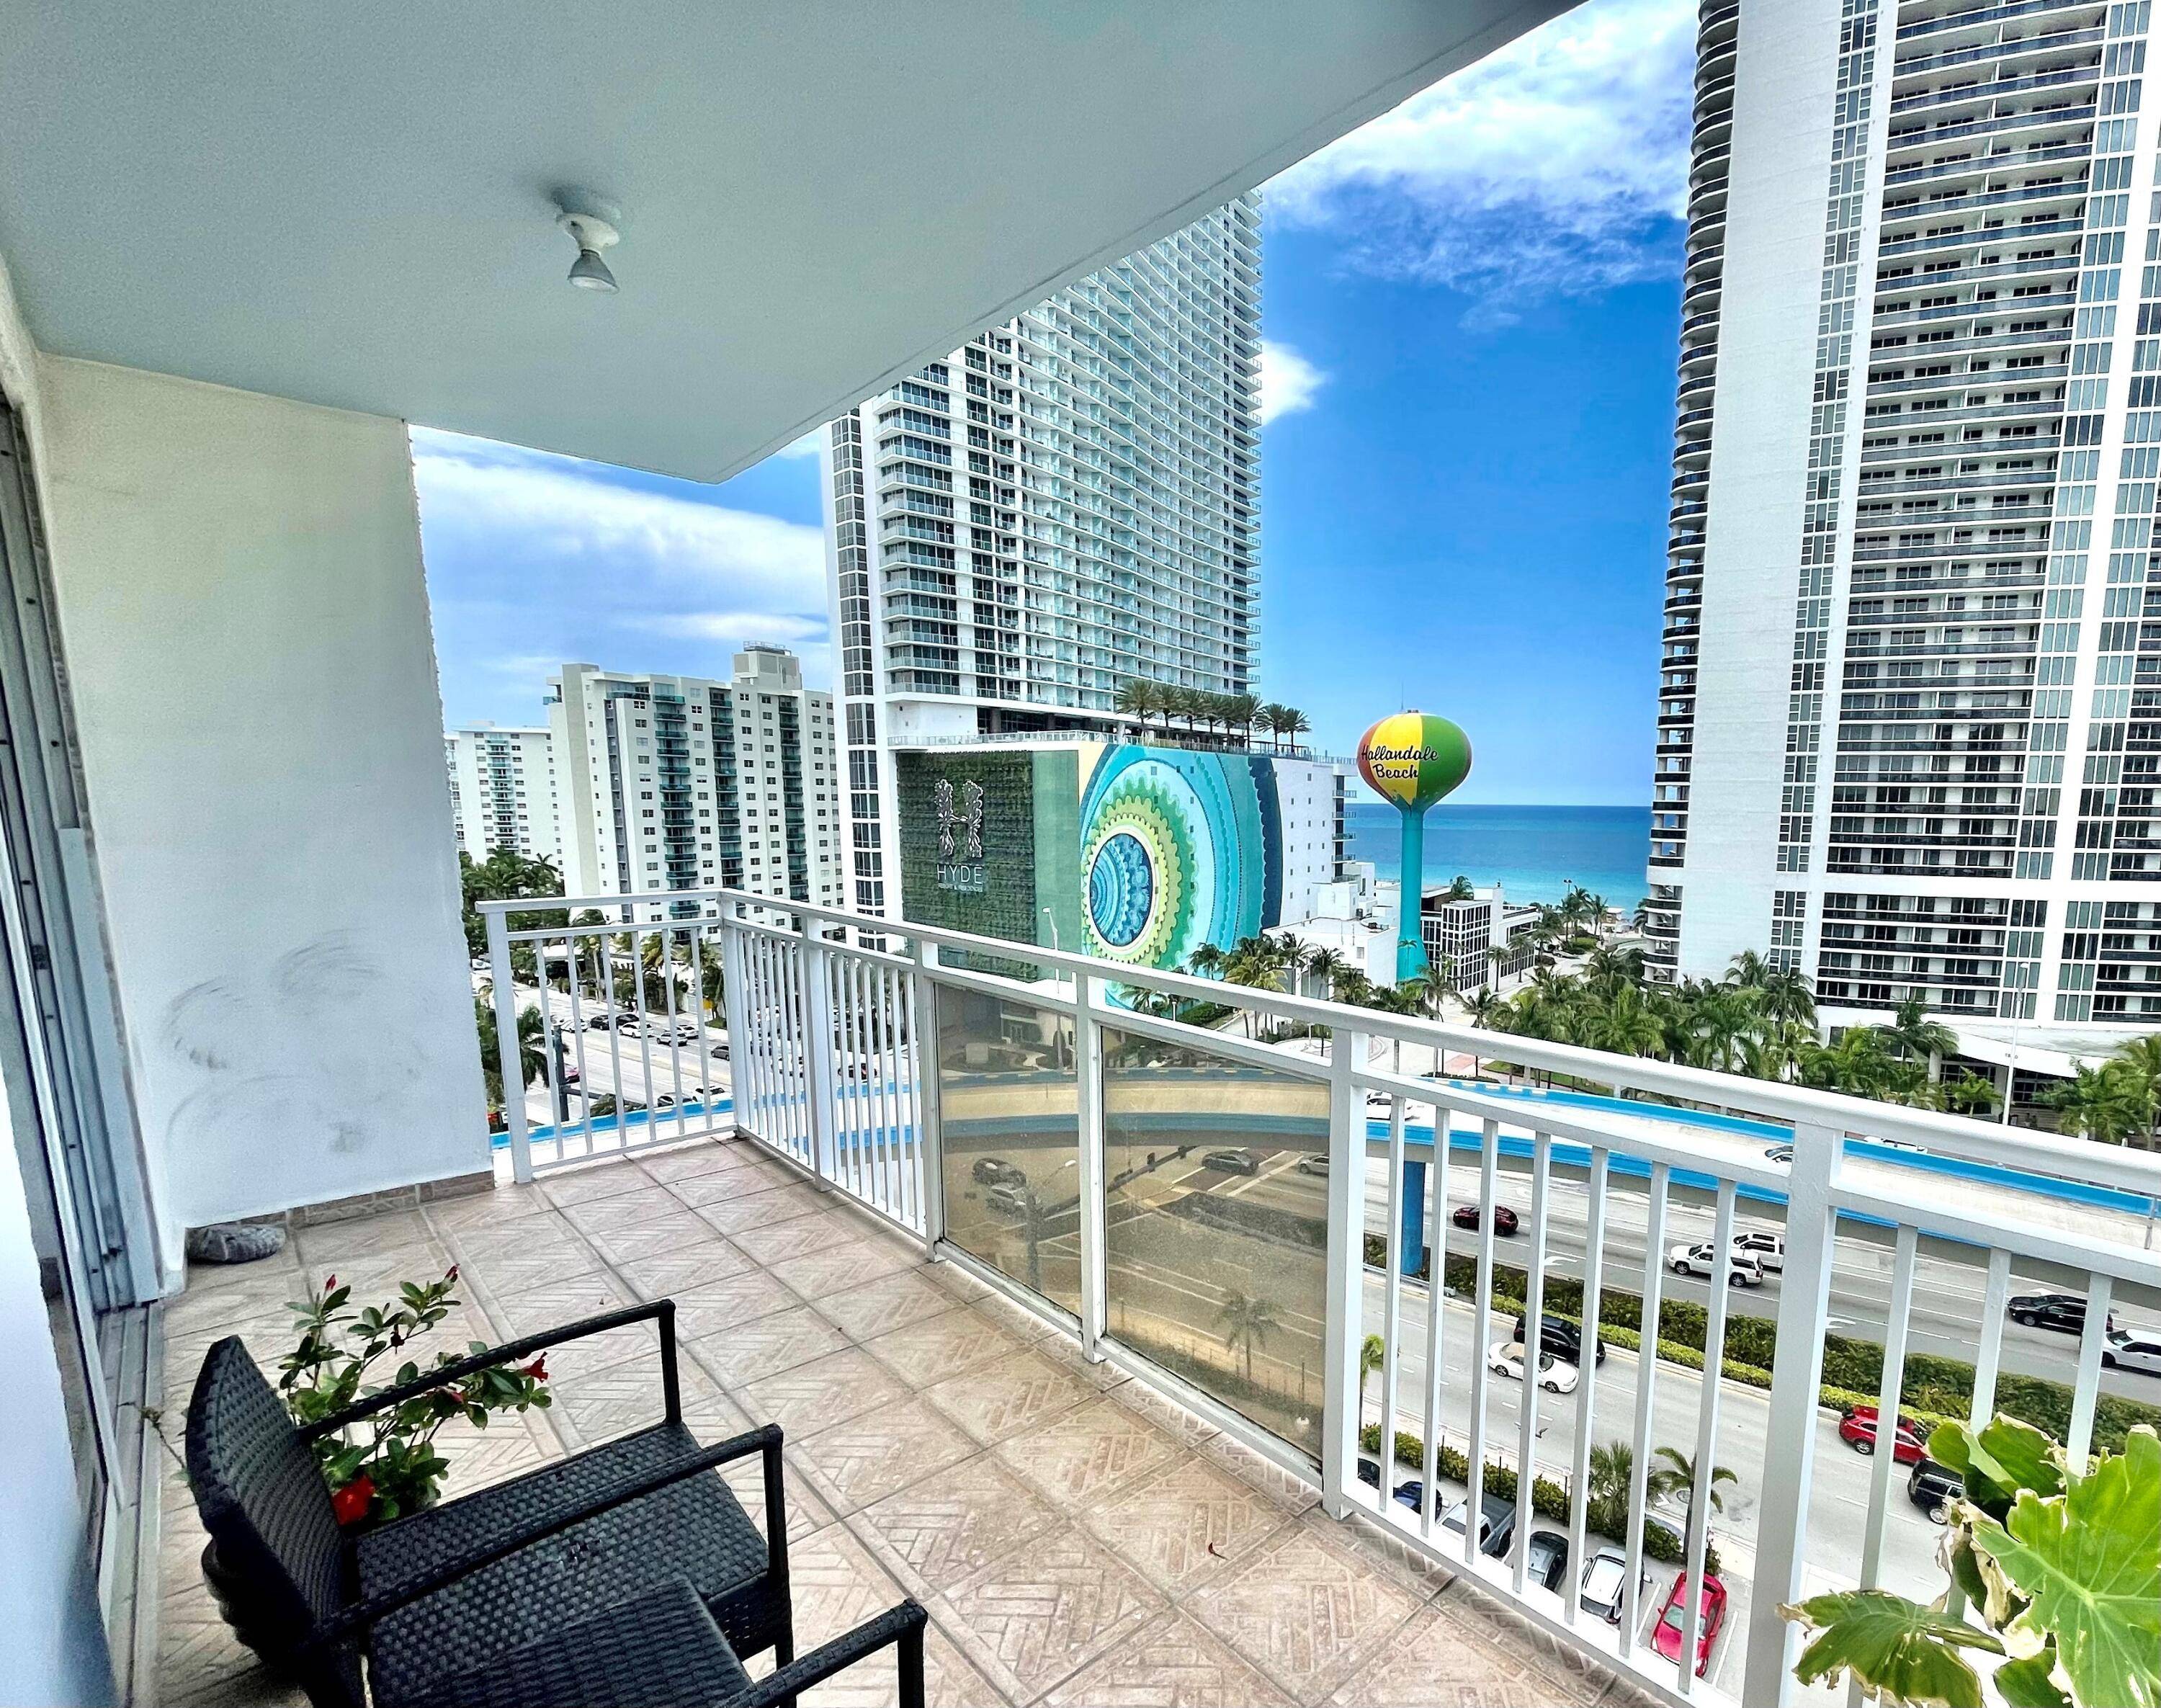 Seasonal furnished rental, immaculate, views of the ocean and intercoastal from your penthouse patio and master bedroom, light and bright nestled right on Ocean Drive, steps away from having the ...